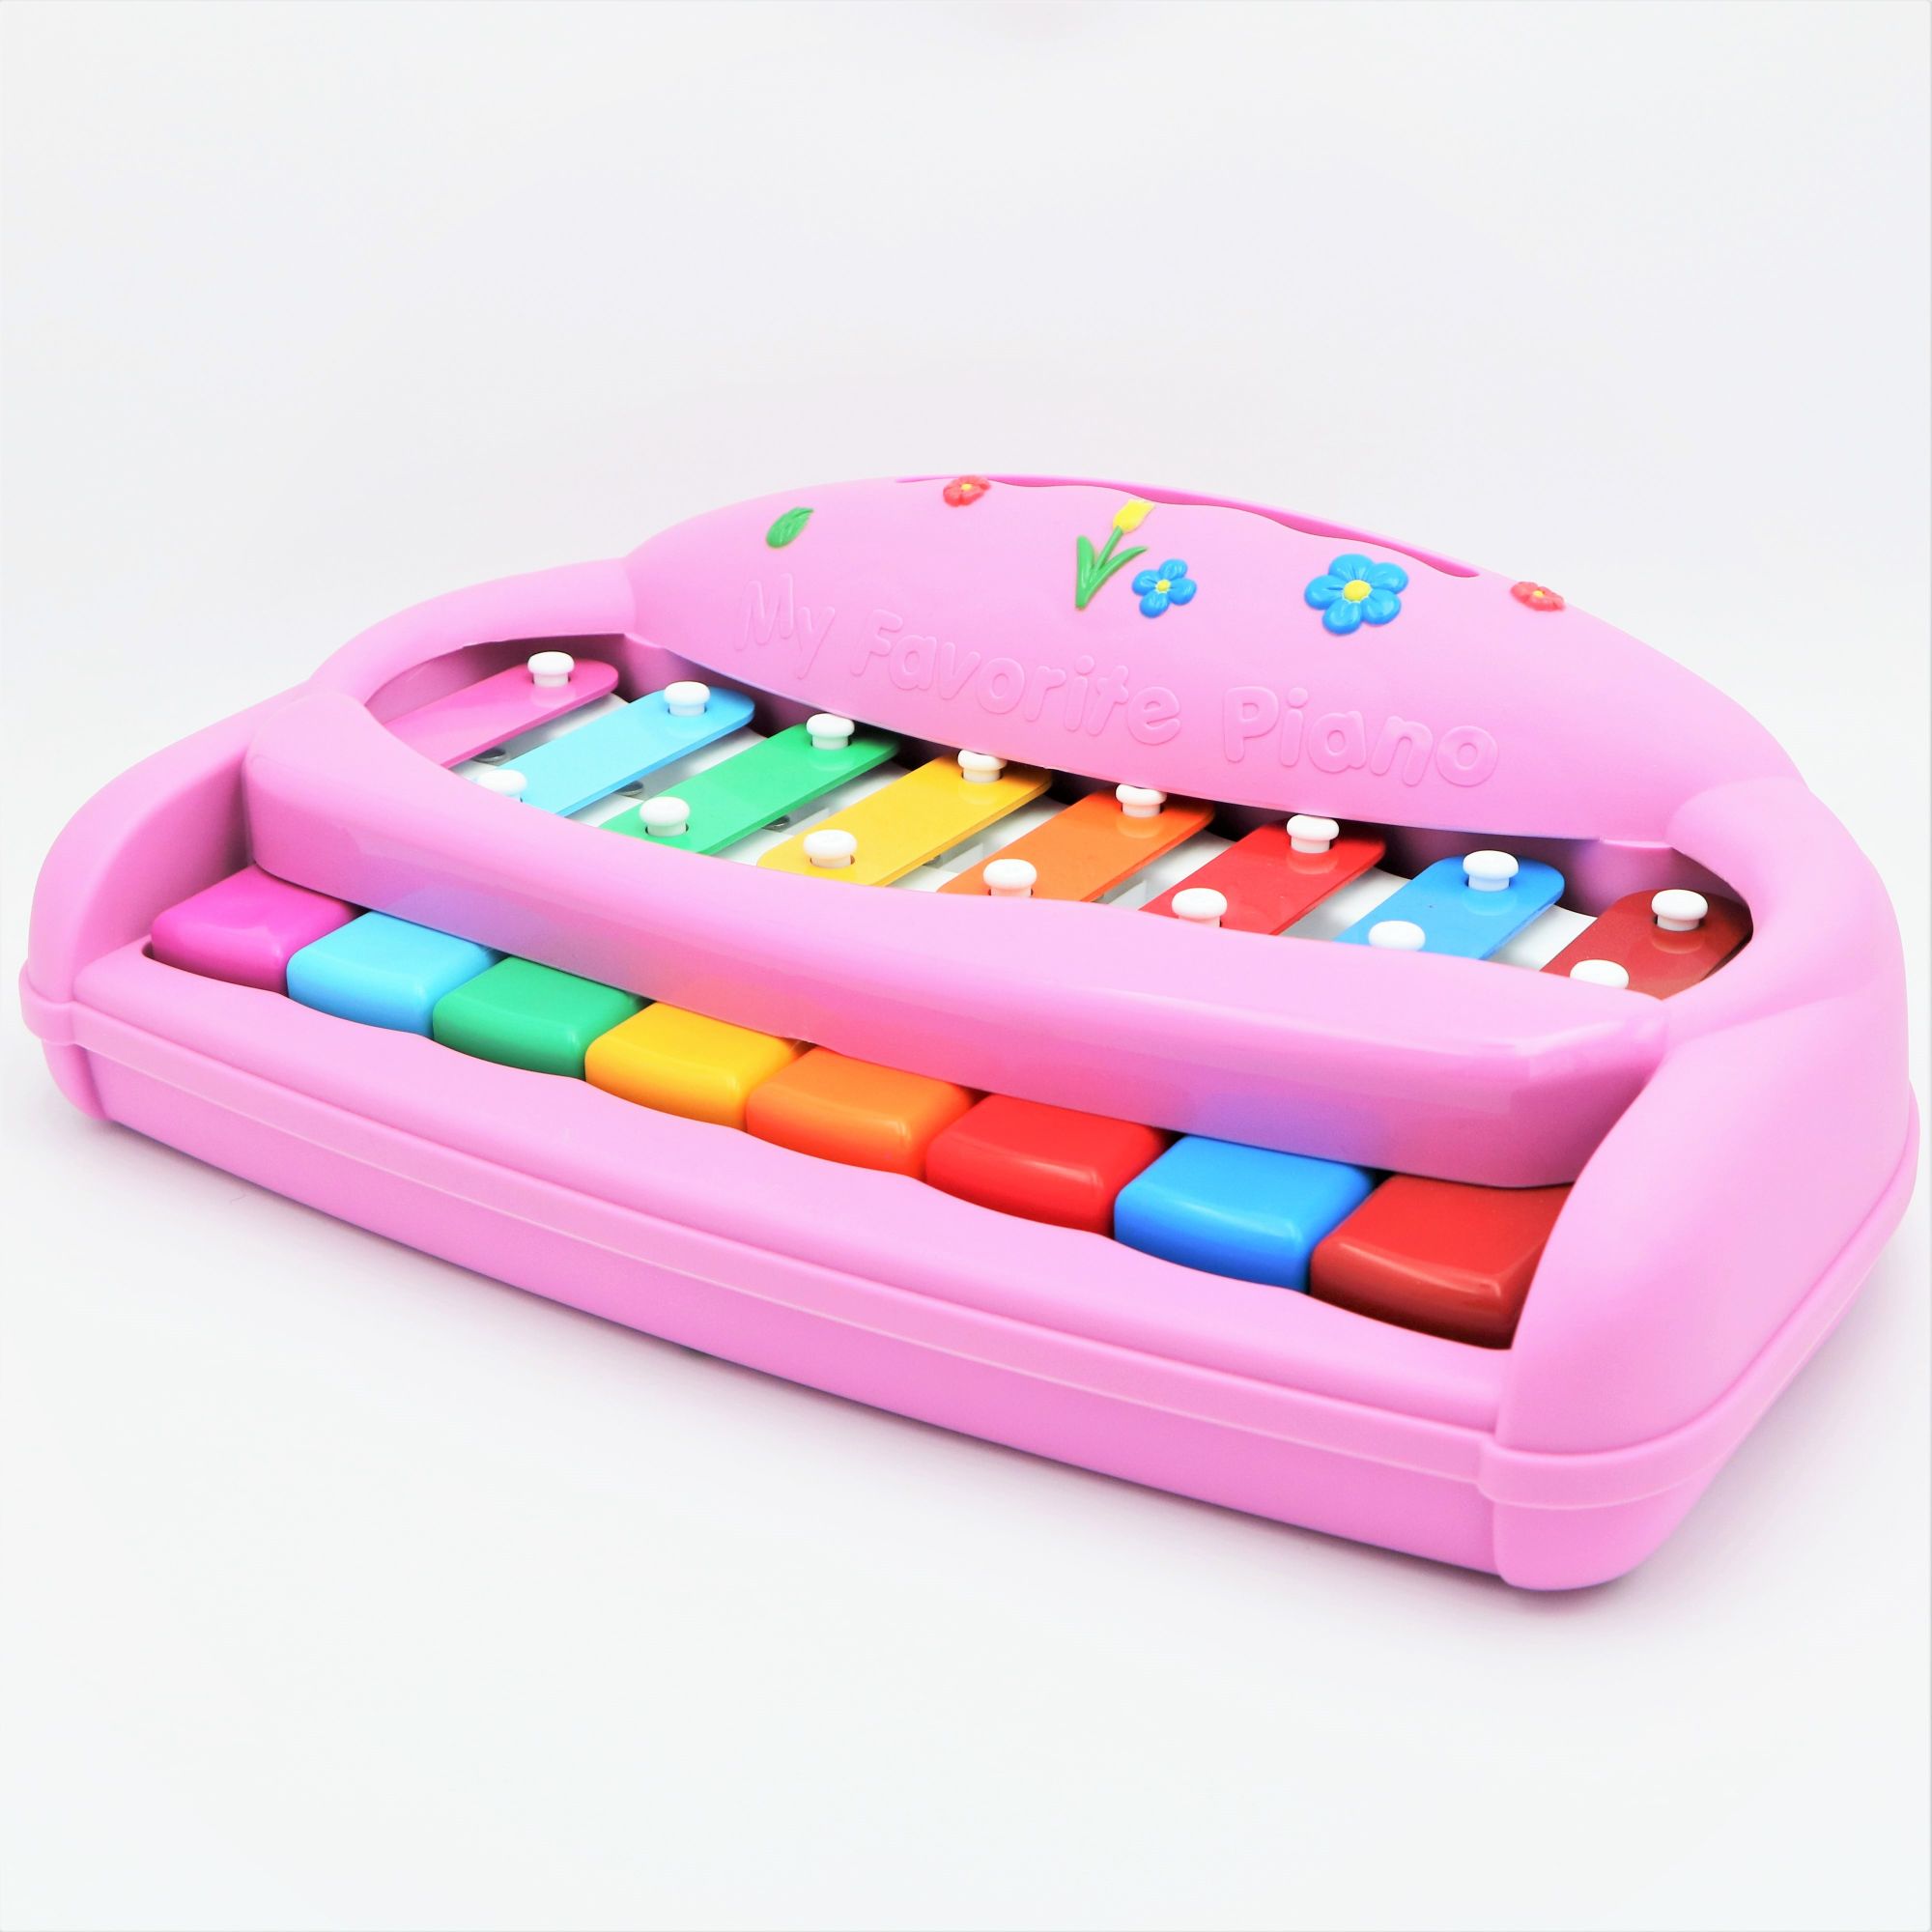 small 8 Note purple musical piano toy for children